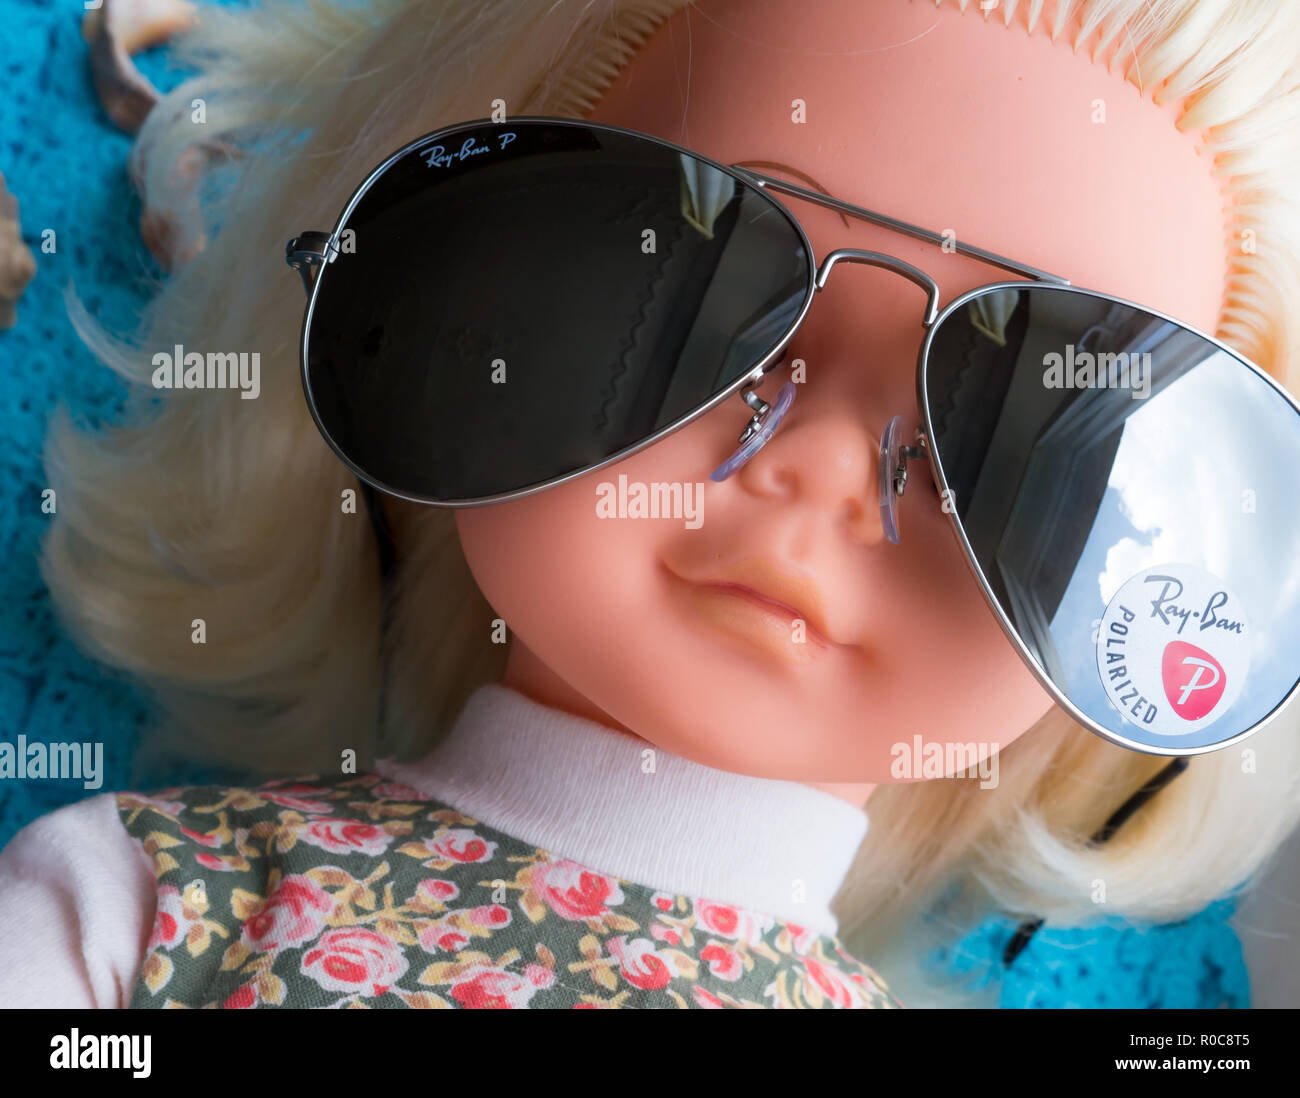 GOMEL, BELARUS - AUGUST 18, 2018: Ray-Ban sunglasses. Ray-Ban is a brand of  sunglasses and eyeglasses created in 1937 Stock Photo - Alamy